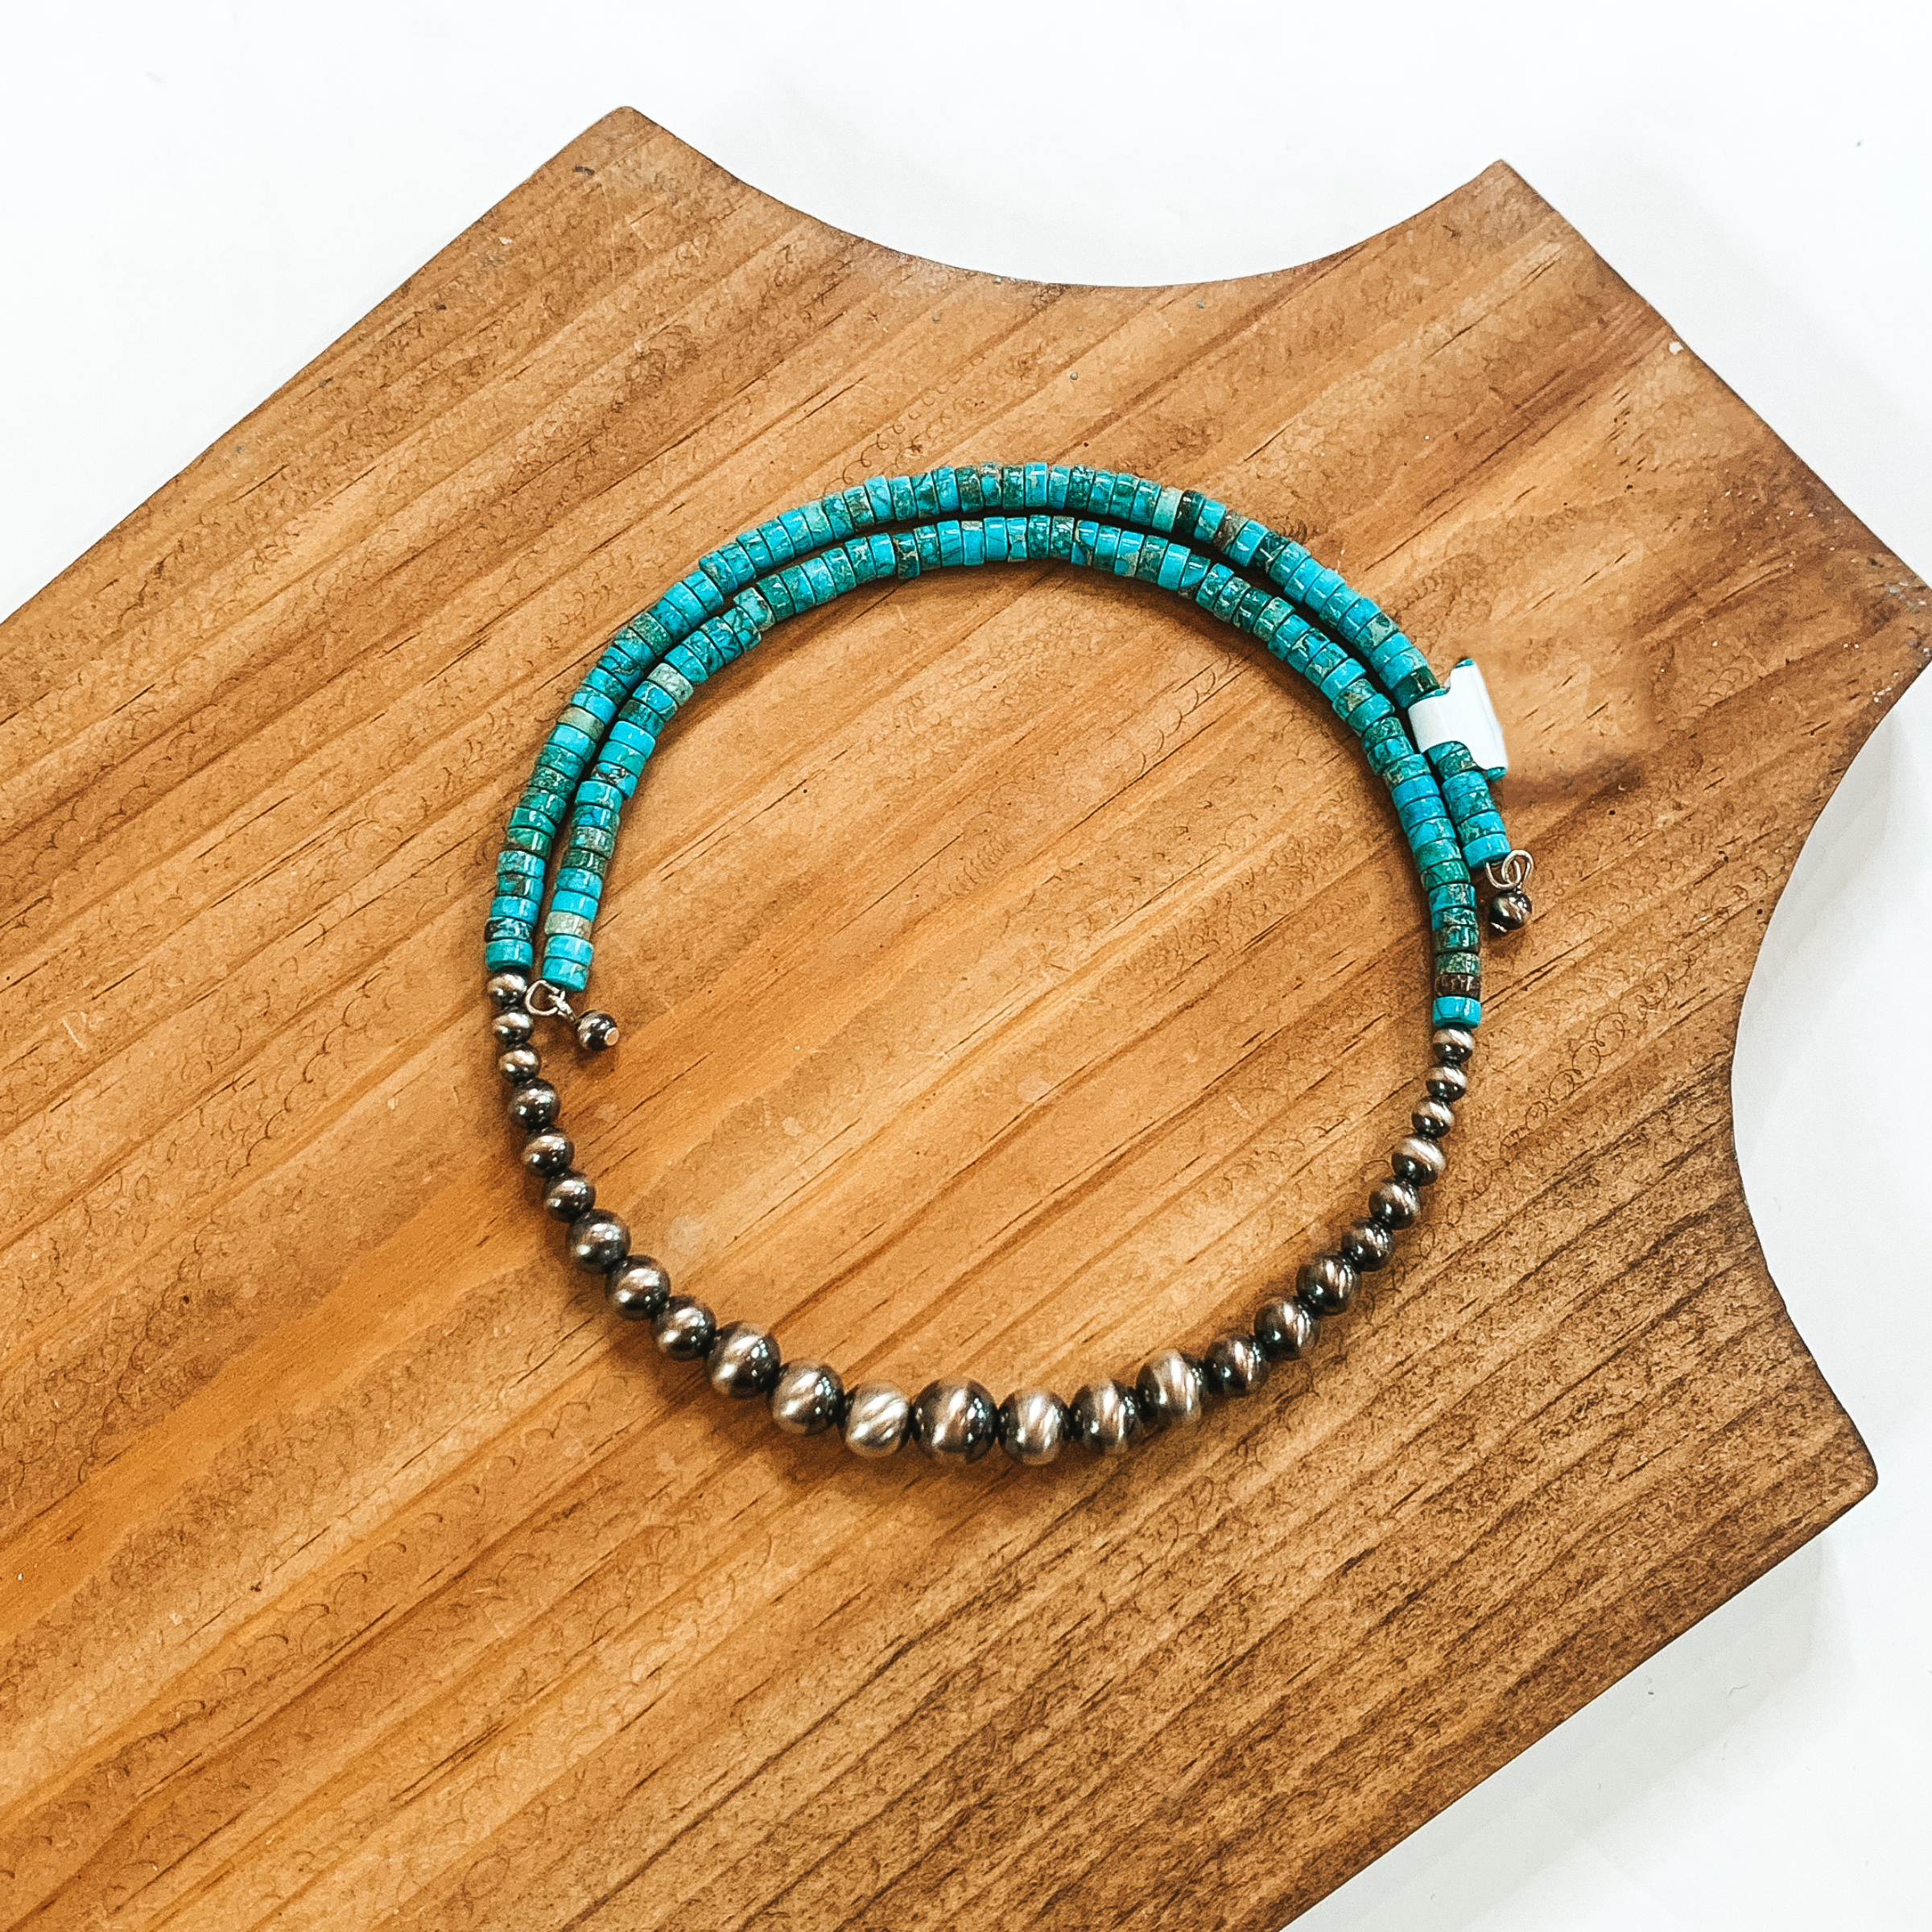 Half silver beaded and half turquoise beaded wrap necklace. This necklace is pictured on a wood necklace holder on a white background. 